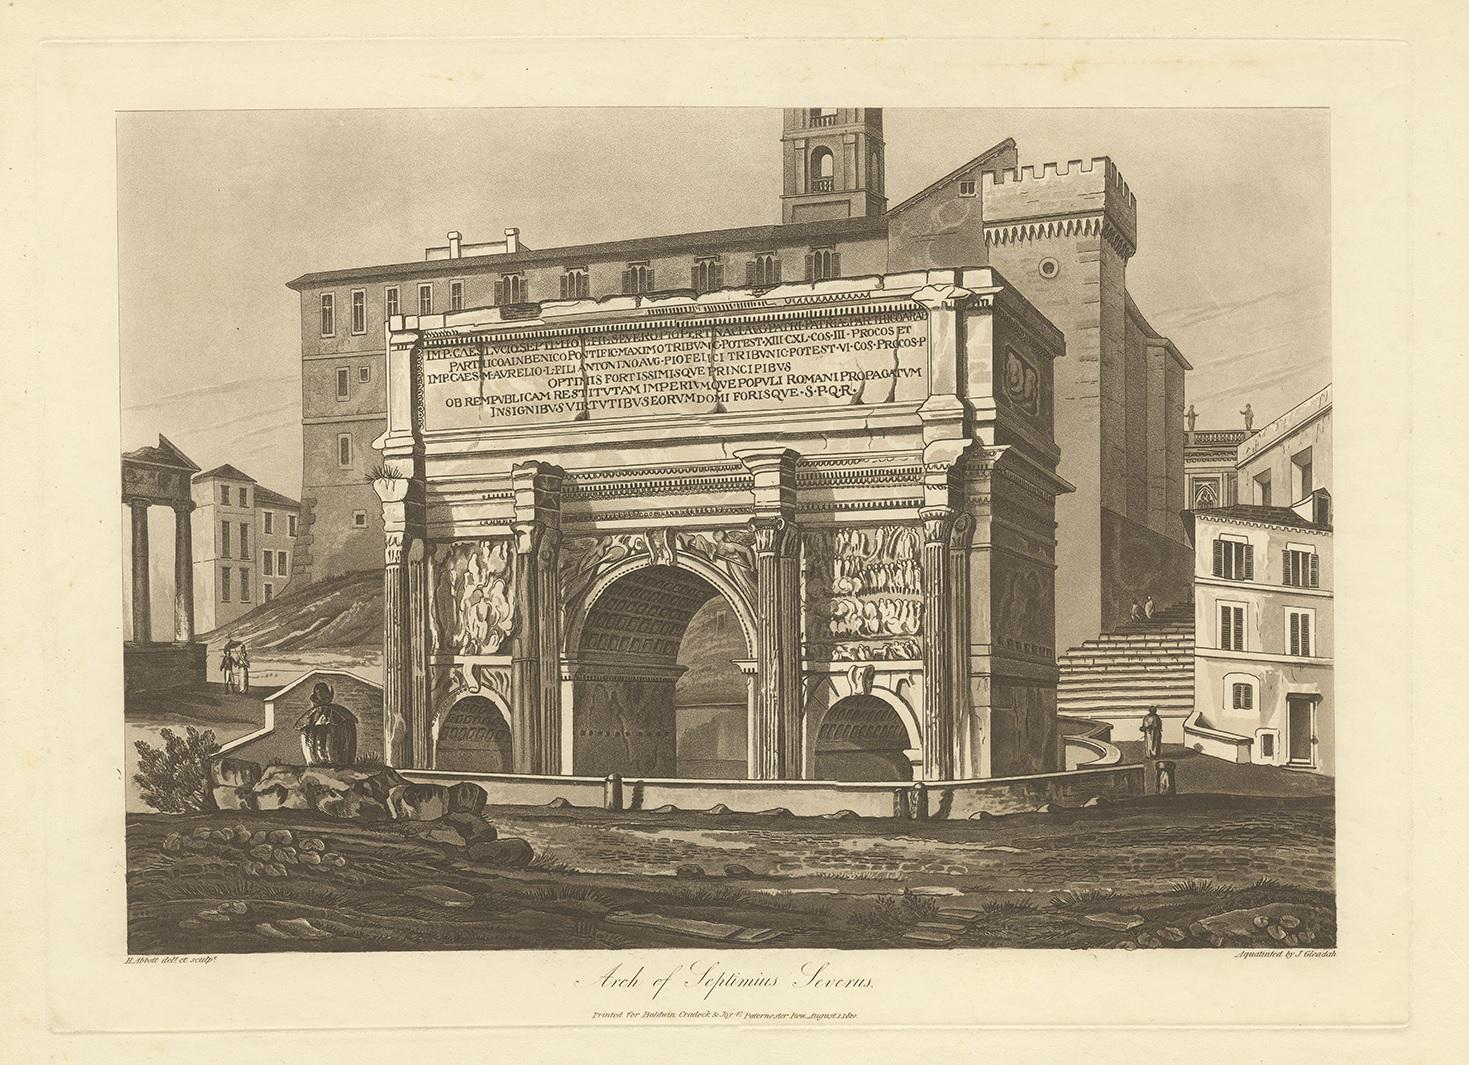 Antique print titled 'Arch of Septimius Severus'. Large aquatint of the Arch of Septimius Severus. The Arch of Septimius Severus at the northwest end of the Roman Forum is a white marble triumphal arch dedicated in 203 to commemorate the Parthian